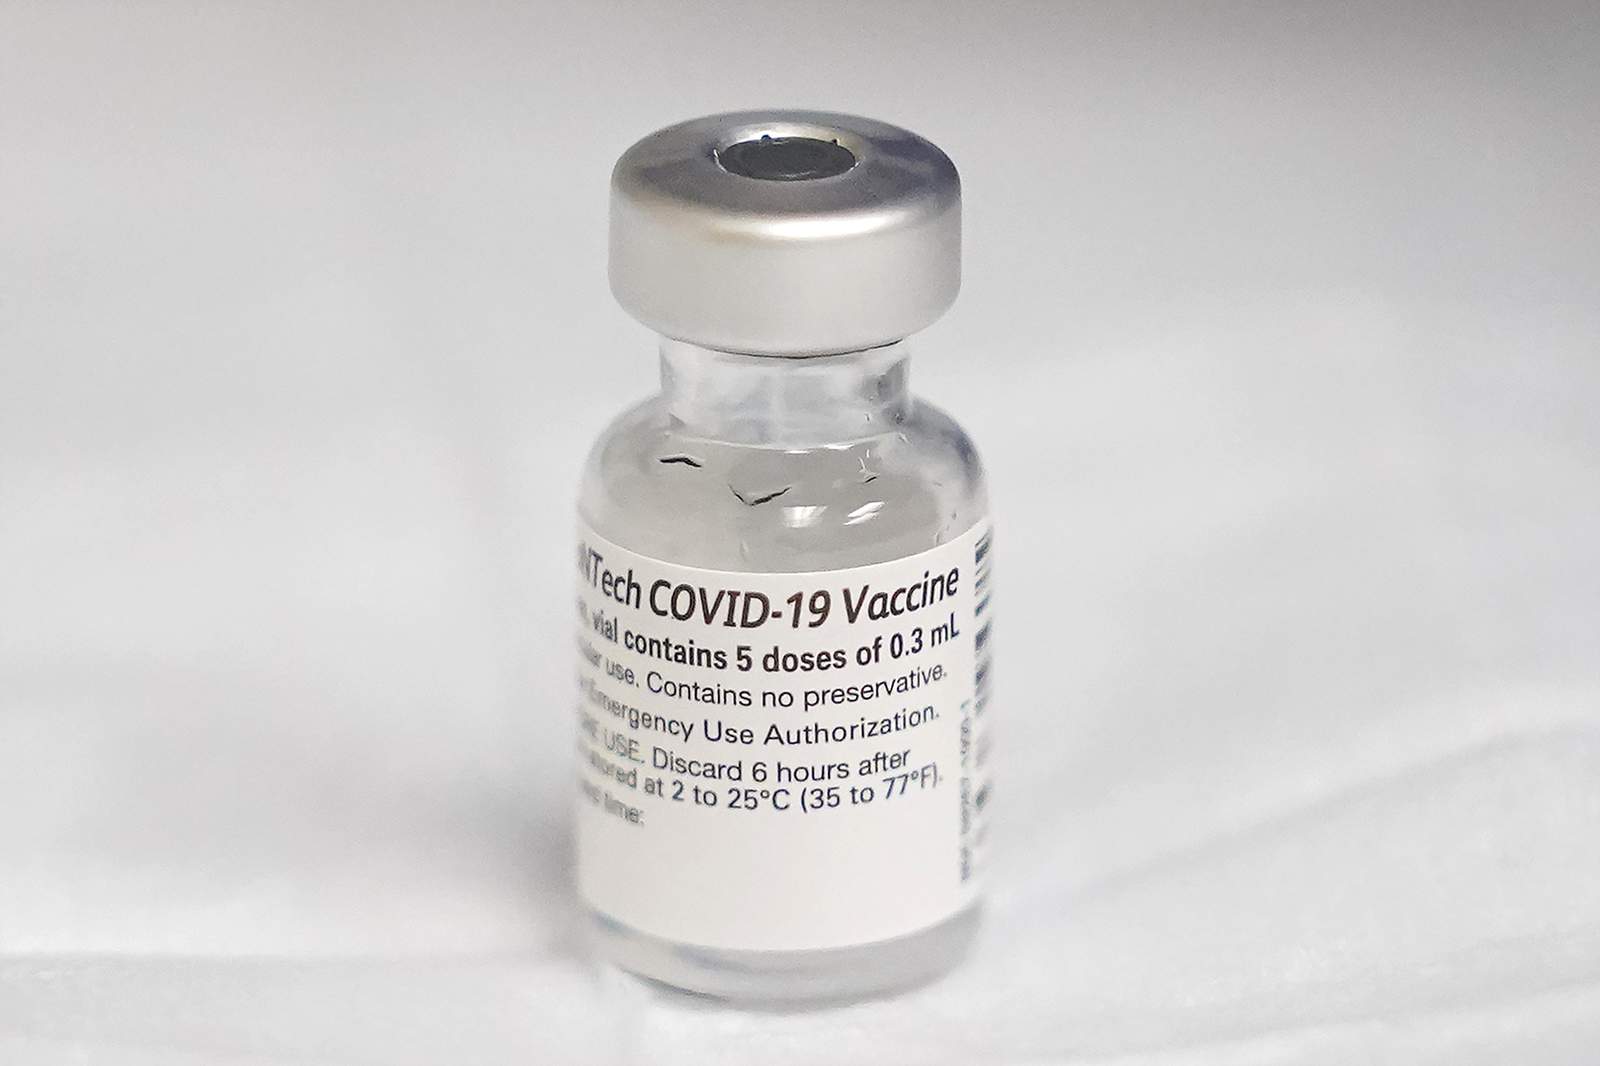 What you need to know about new scam related to COVID-19 vaccine, according to the FBI